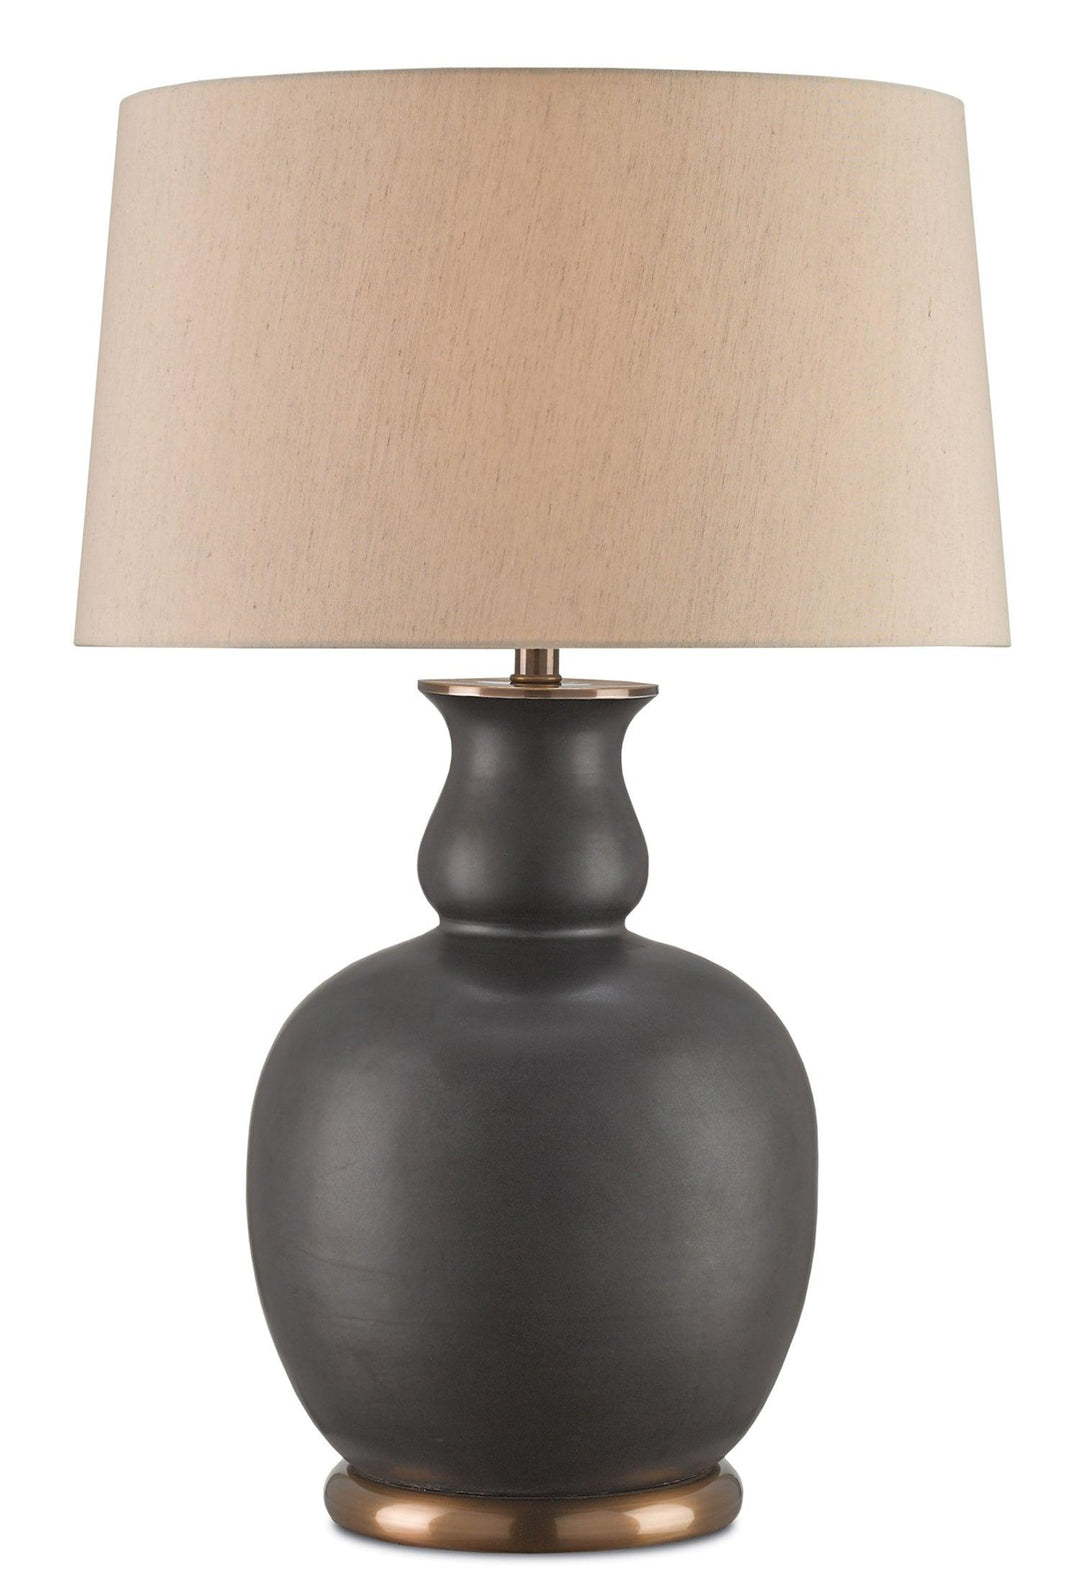 Ultimo Table Lamp - Casey & Company